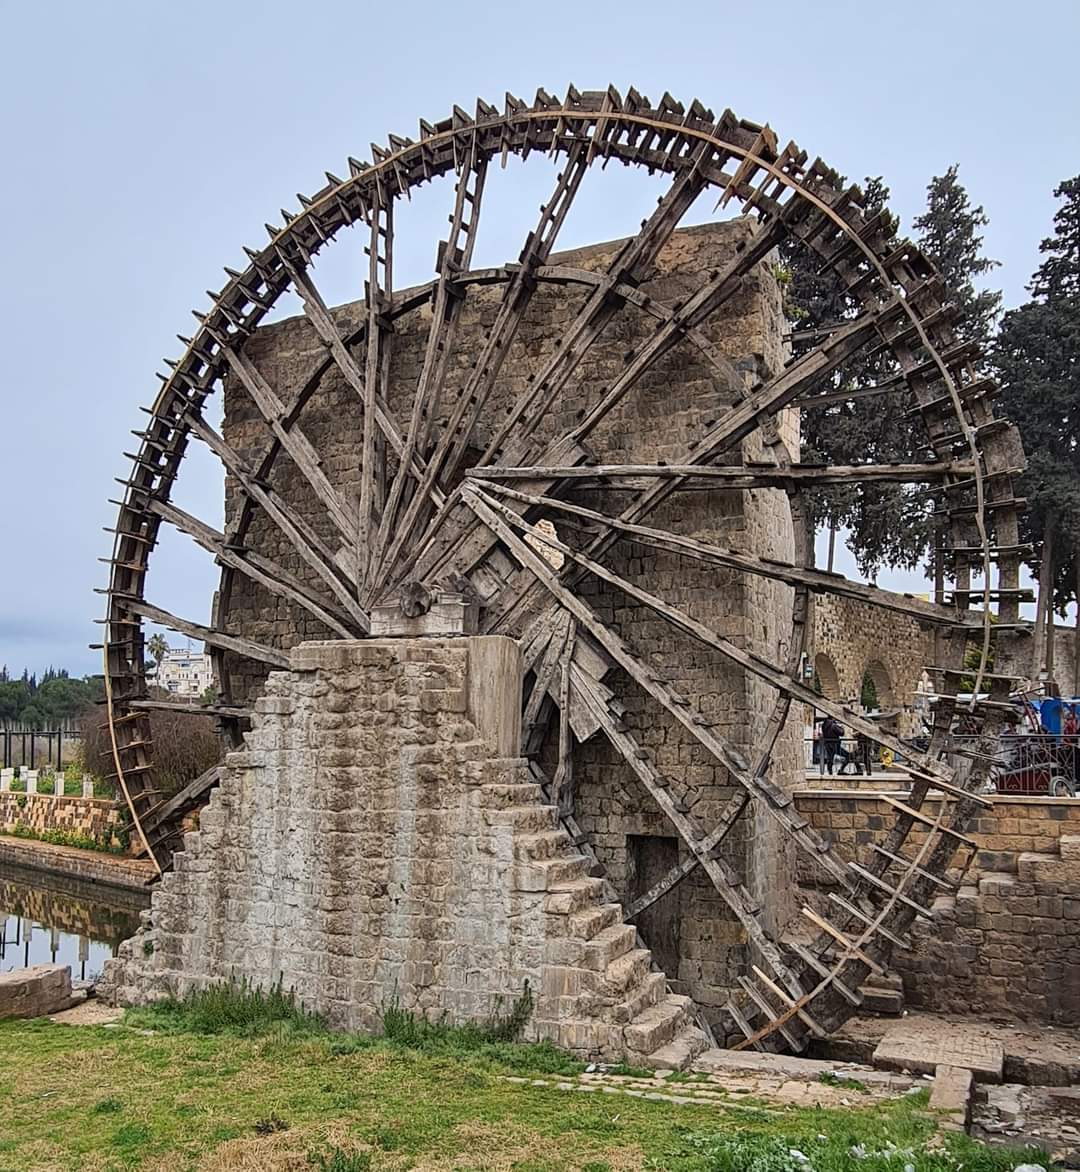 A wooden water wheel in Hama, Syria